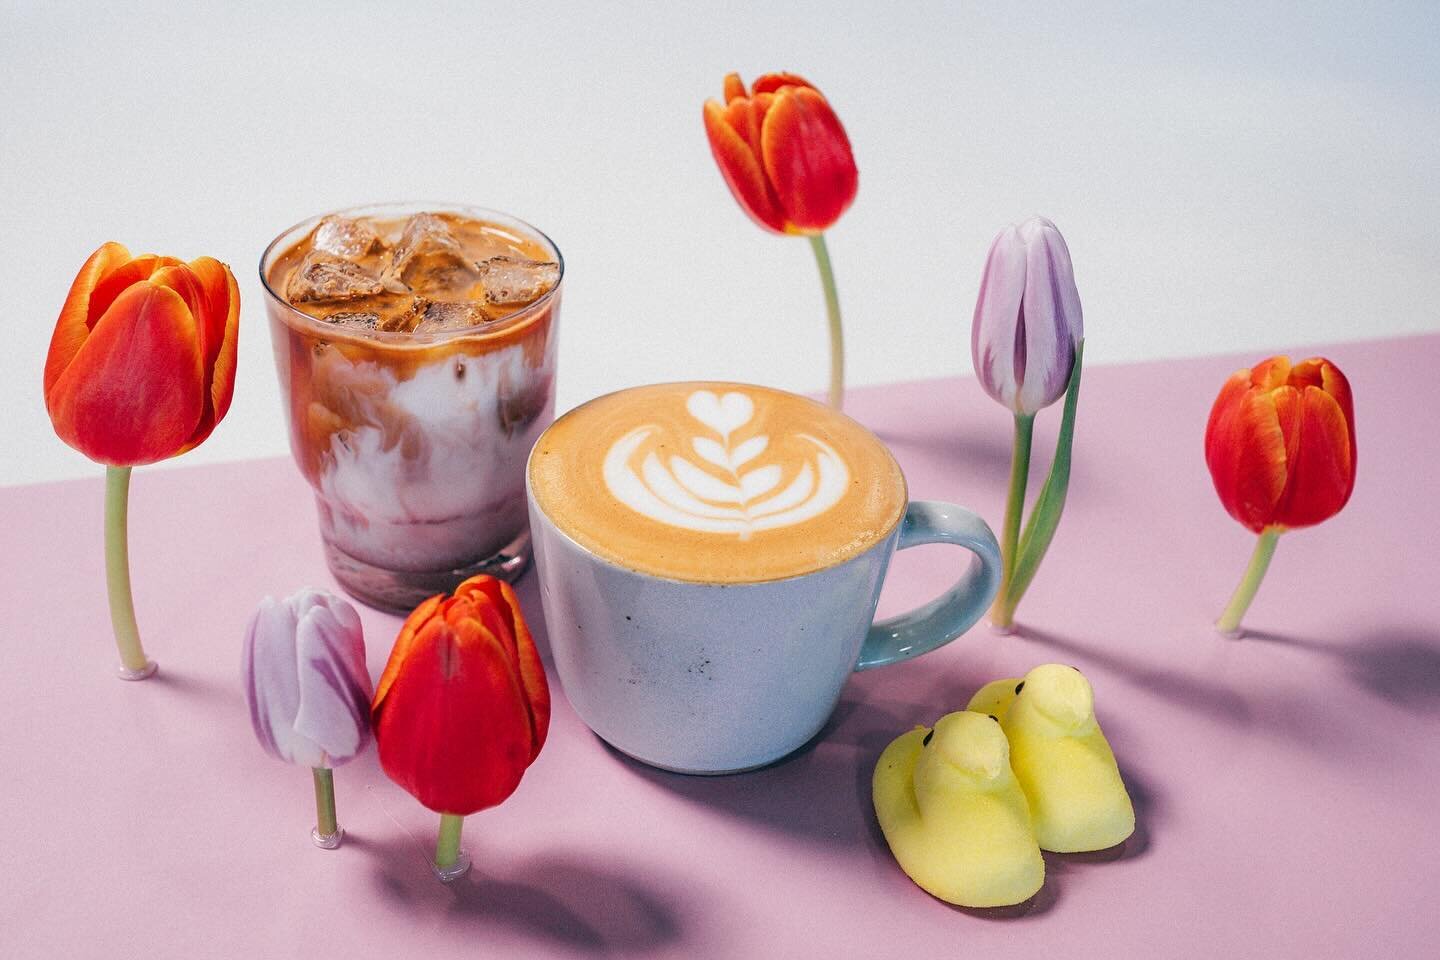 Our Easter Latte is &ldquo;peep&rdquo;ing at you marshmallow lovers! This blend of marshmallow &amp; bergamot is so delicious we had to keep it around for a week! Available ONLY this Friday the 29th-April 5th 🐥